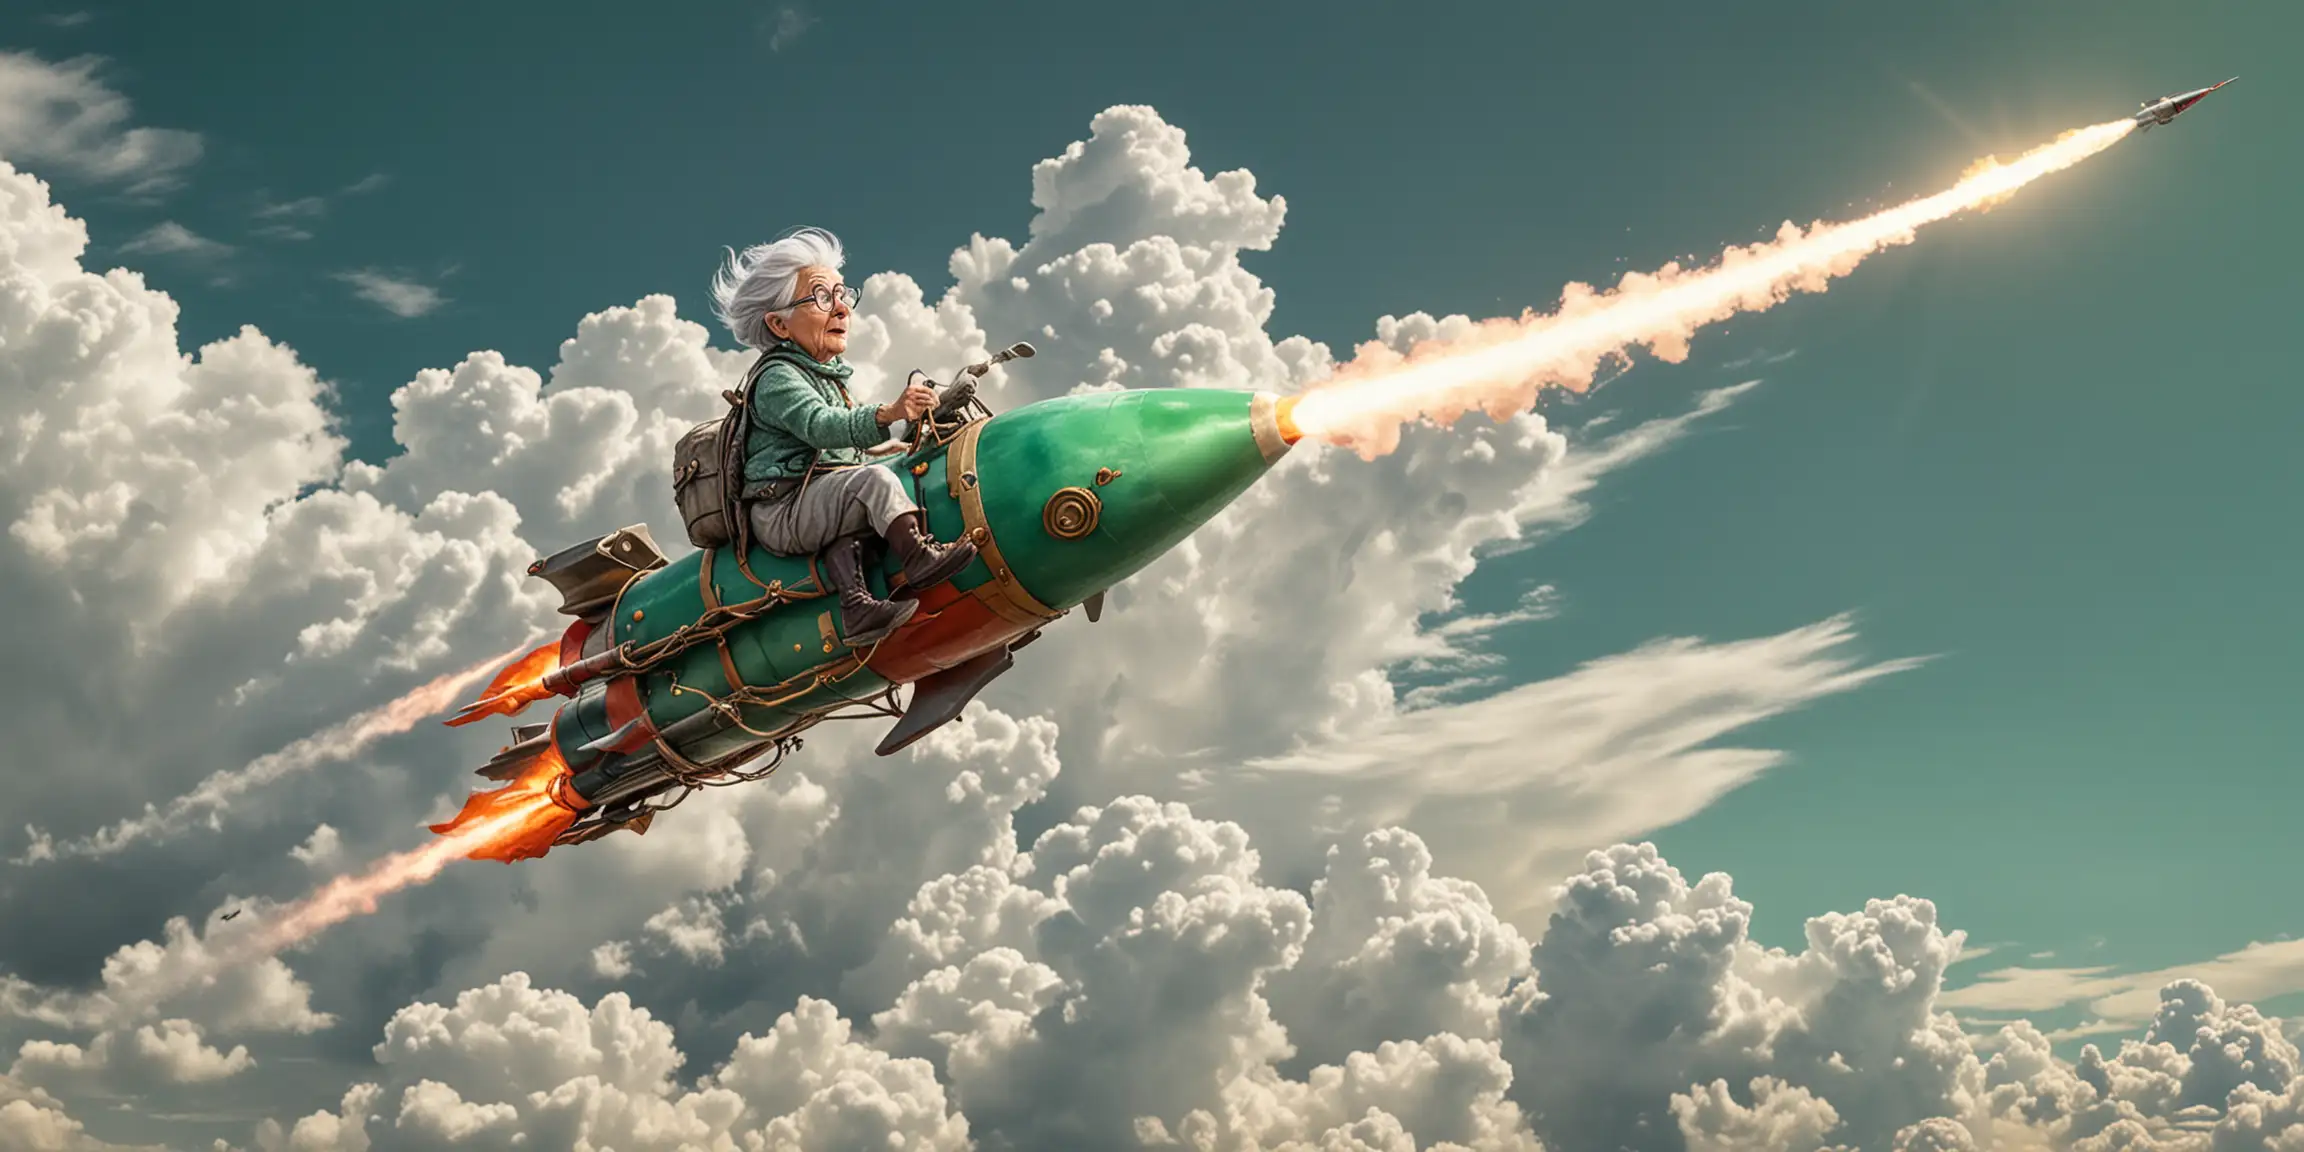 OLD LADY WITH GRAY HAIR RIDING A ROCKET ON A emerald coloreSKY WITH PUFFY CLOUDS